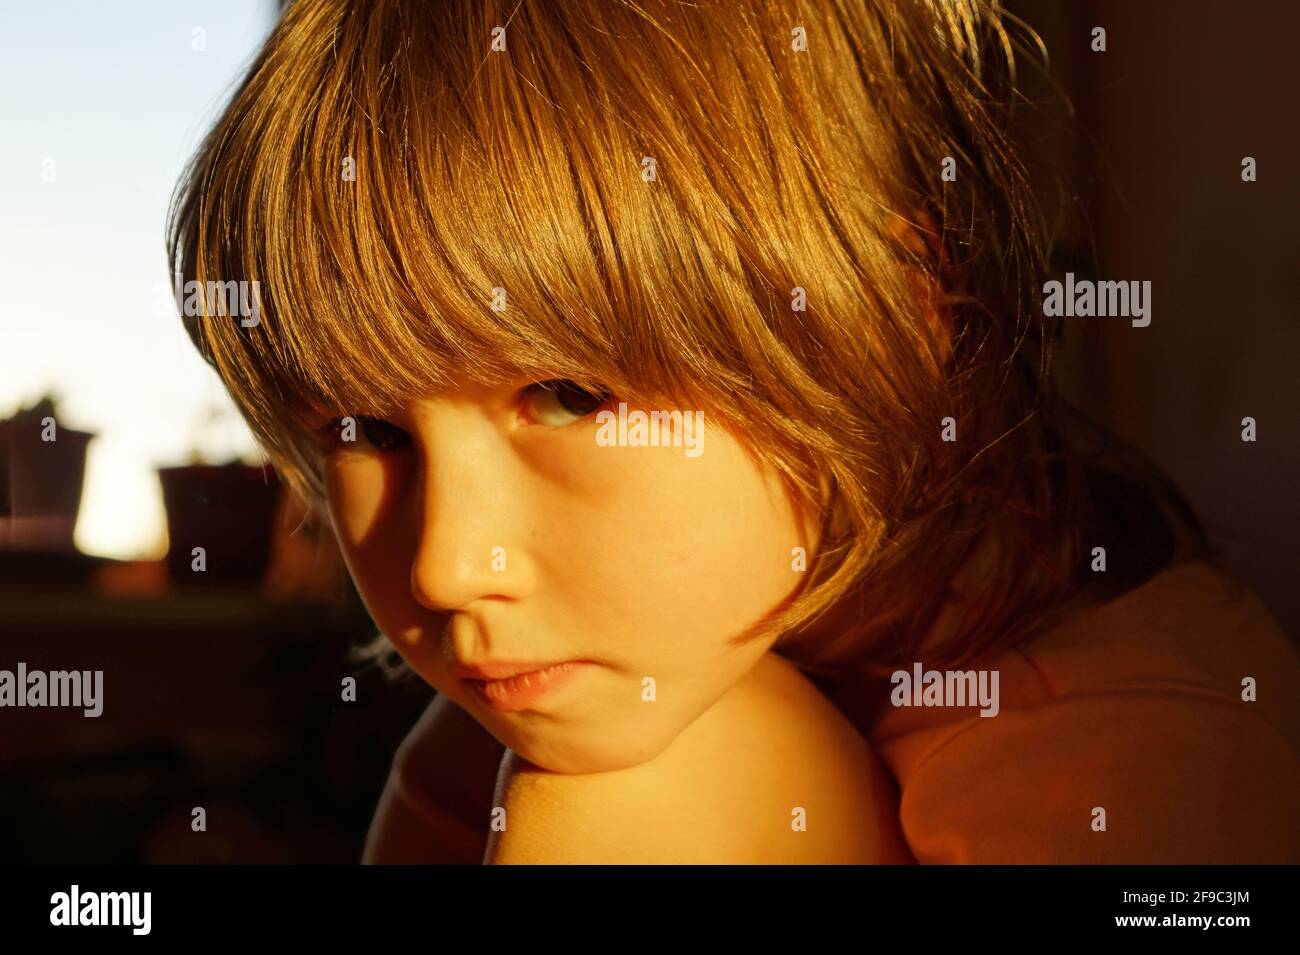 A 5-10 year old girl looks at the camera Stock Photo